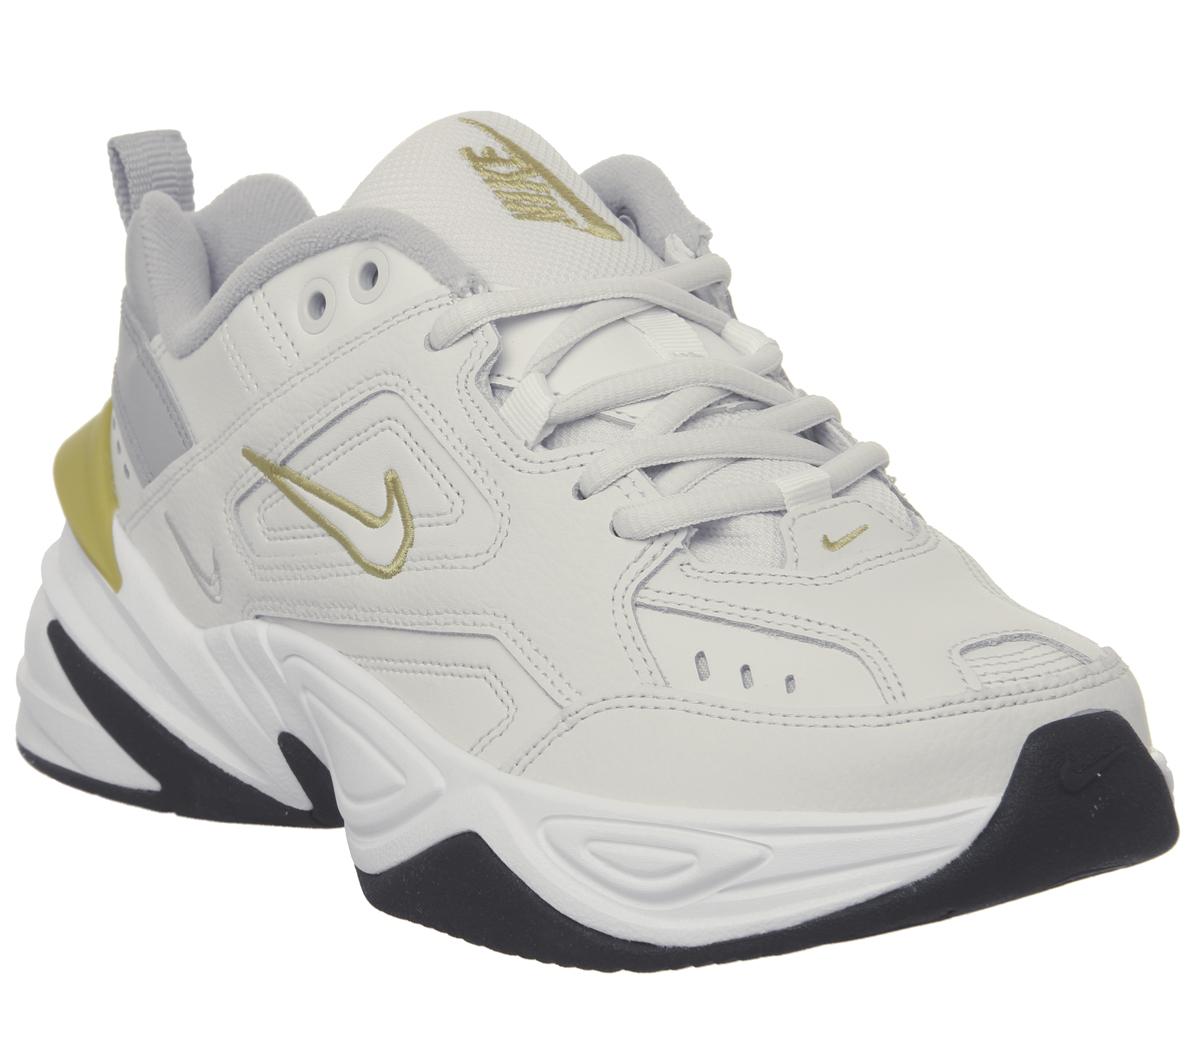 Equipo agricultores Específico Nike M2k Tekno Trainers Platinum Celery Wolf Grey White Black F - Women's  Trainers